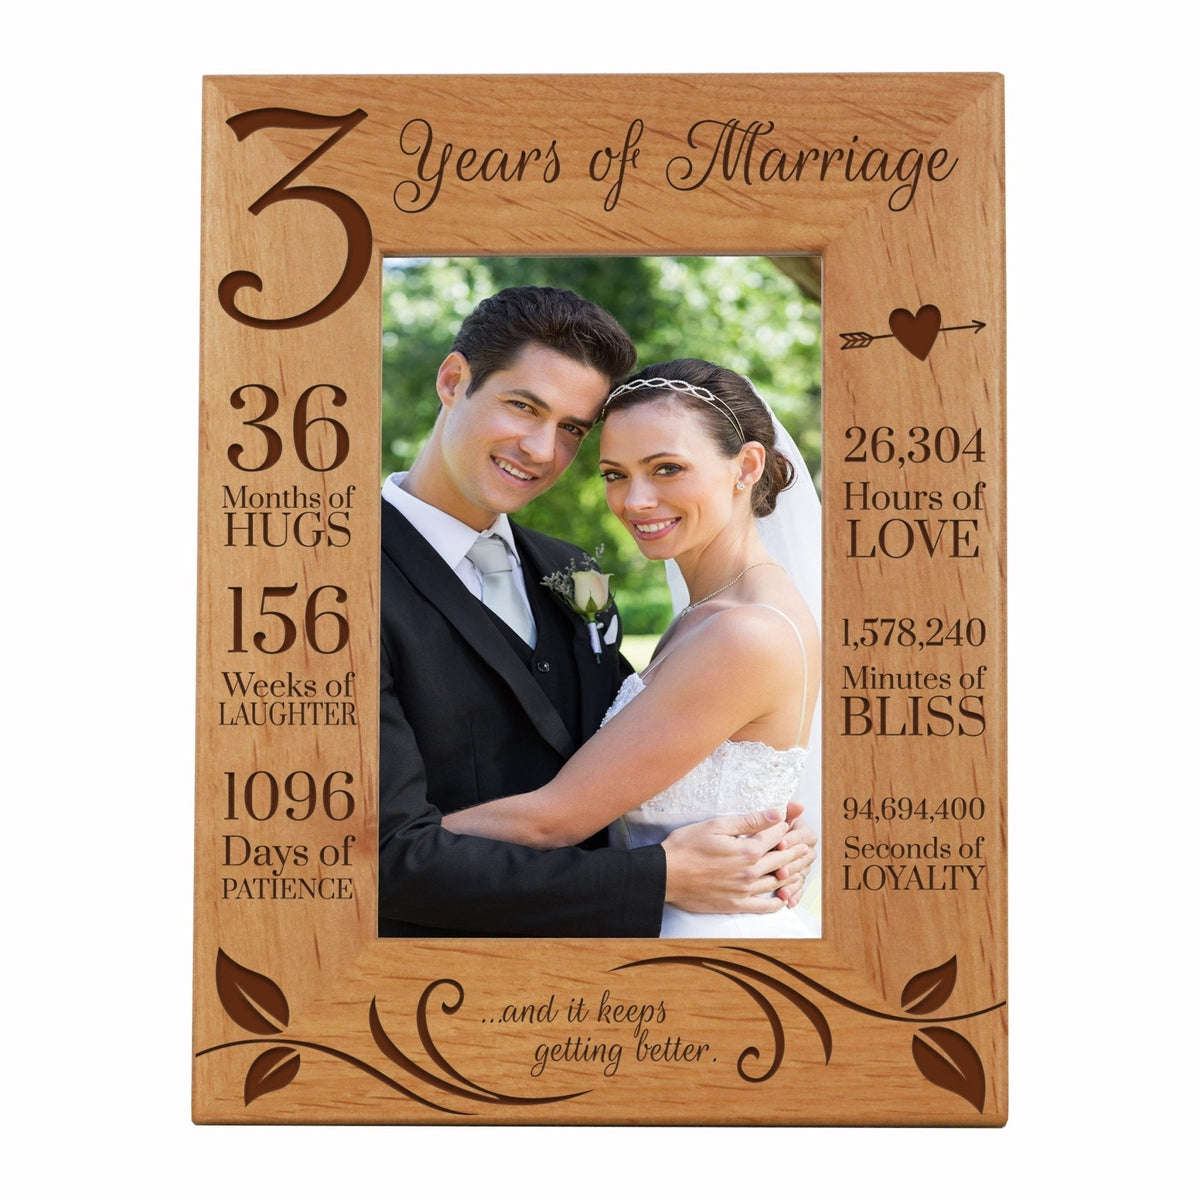 Engraved 3rd Wedding Anniversary Photo Frame Wall Decor Gift for Couples - Keeps Getting Better - LifeSong Milestones